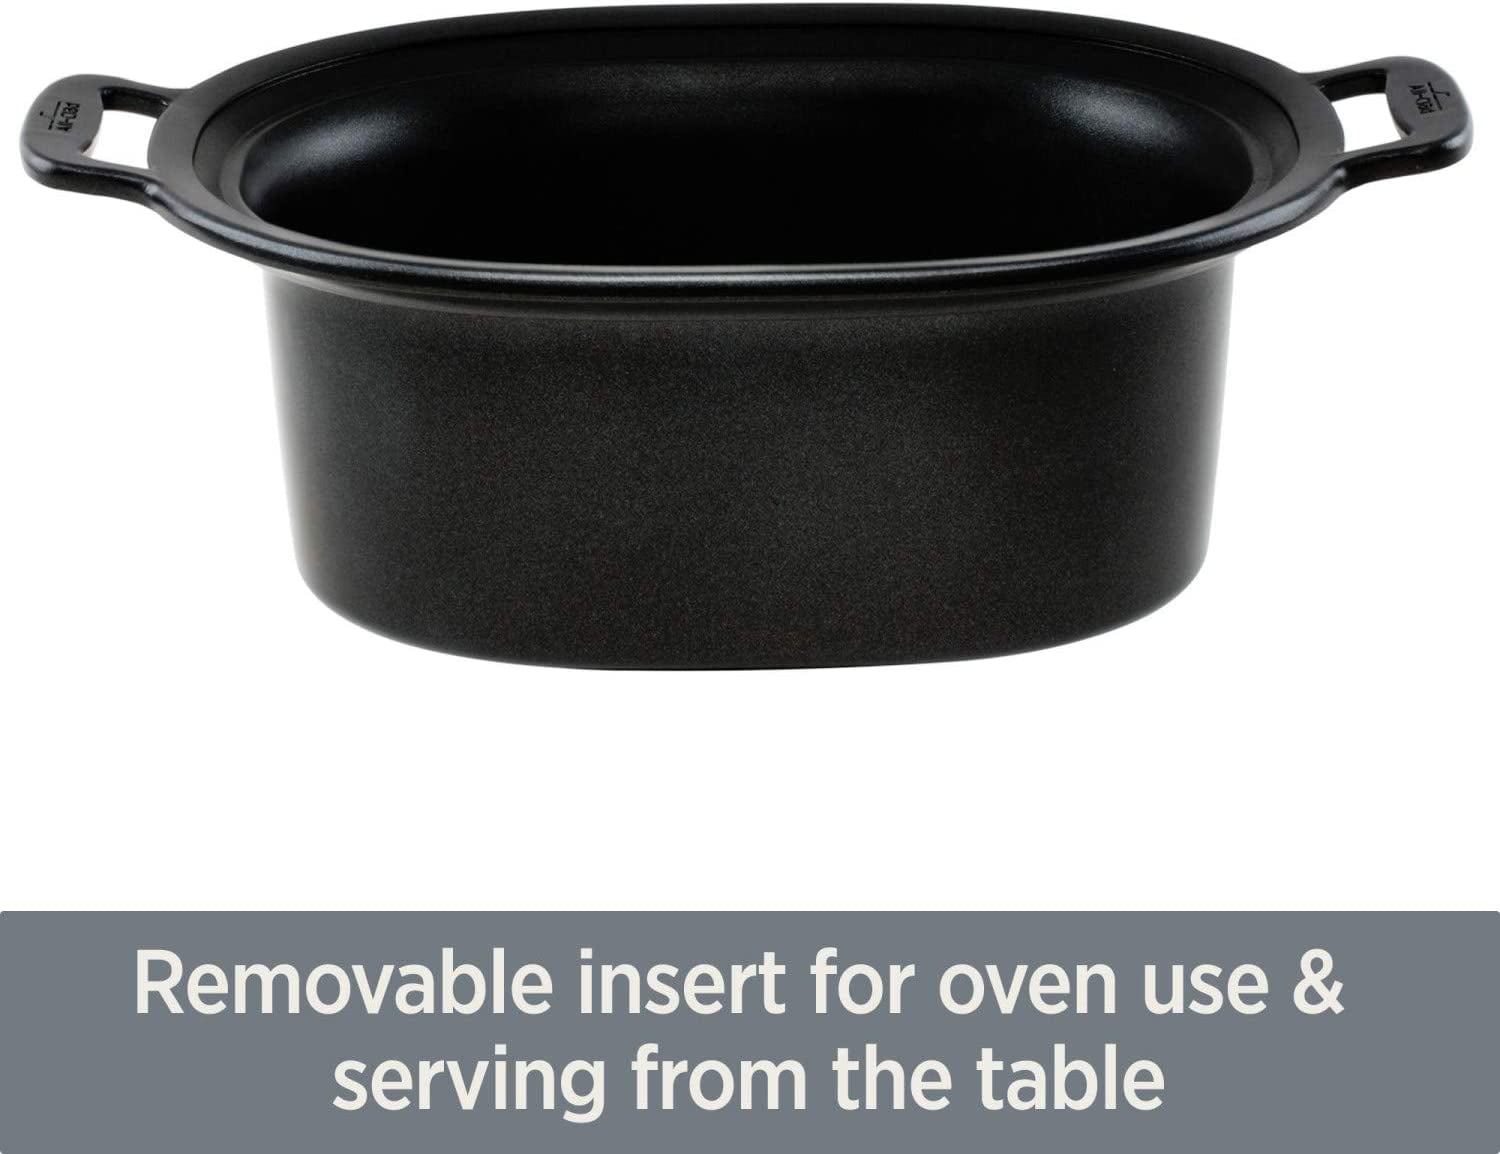 All-Clad Replacement Ceramic Insert for Slow Cooker - Black(1500990903) 